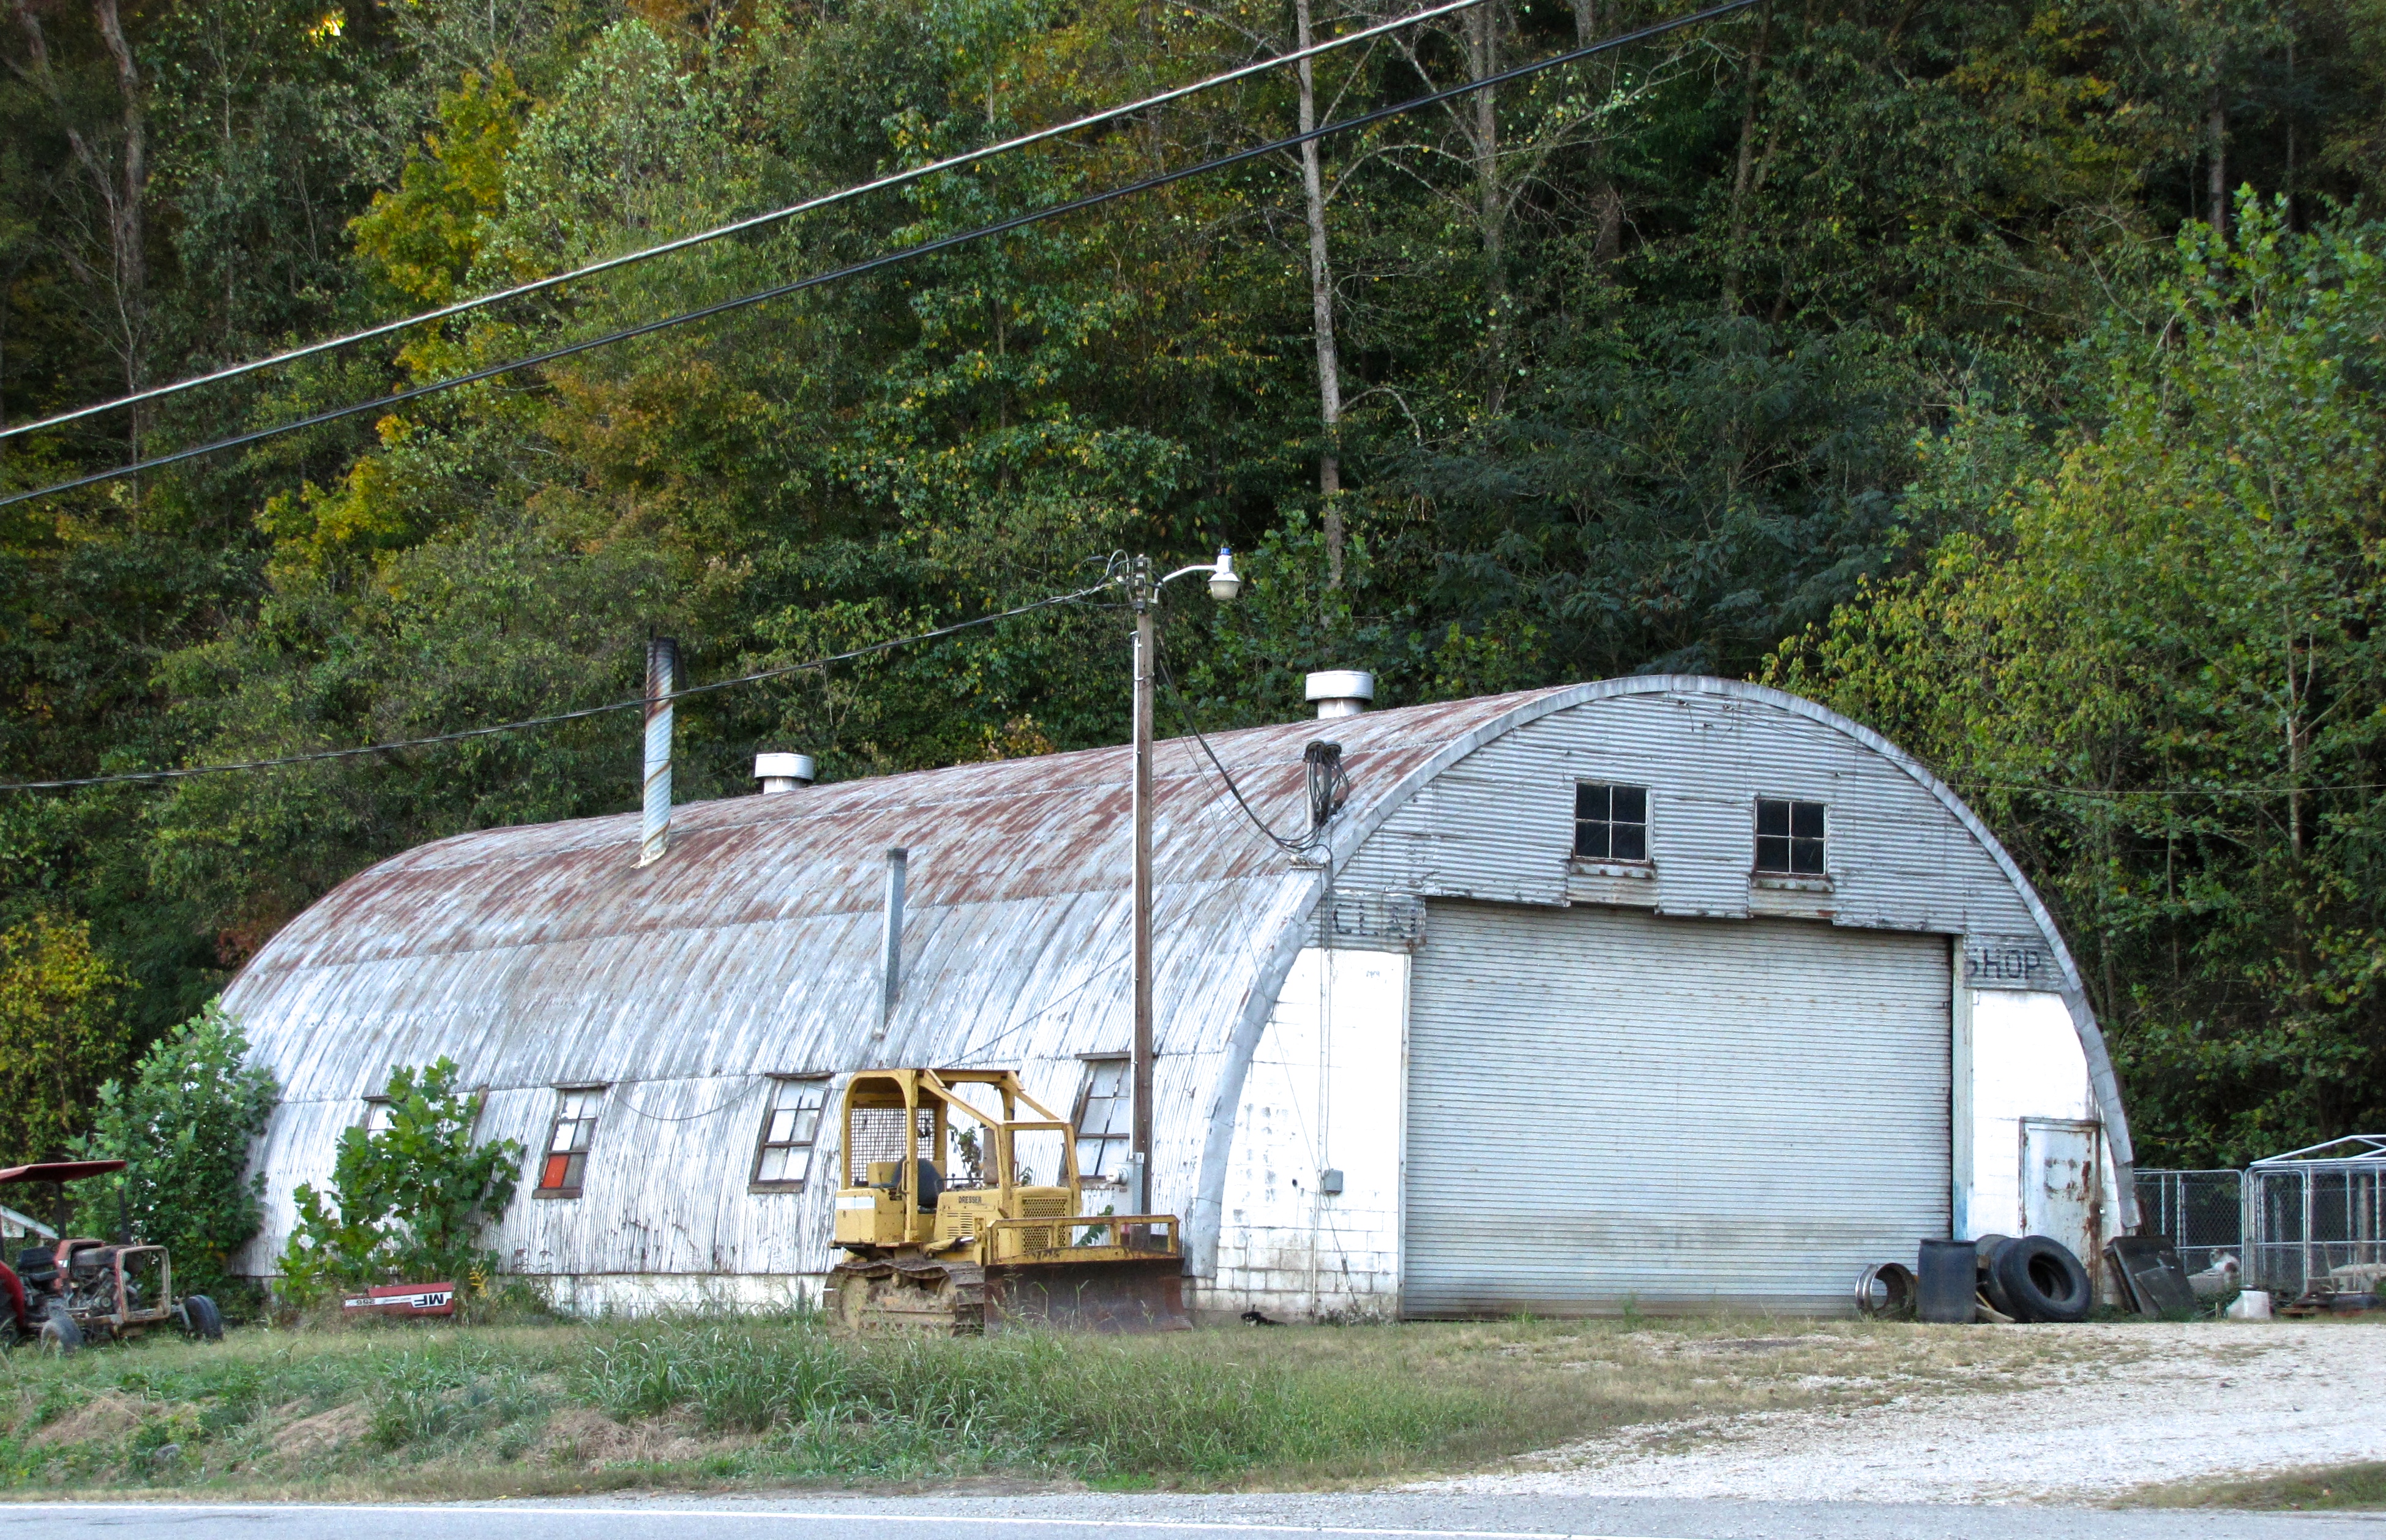 quonset hut in Privacy Policy, KY